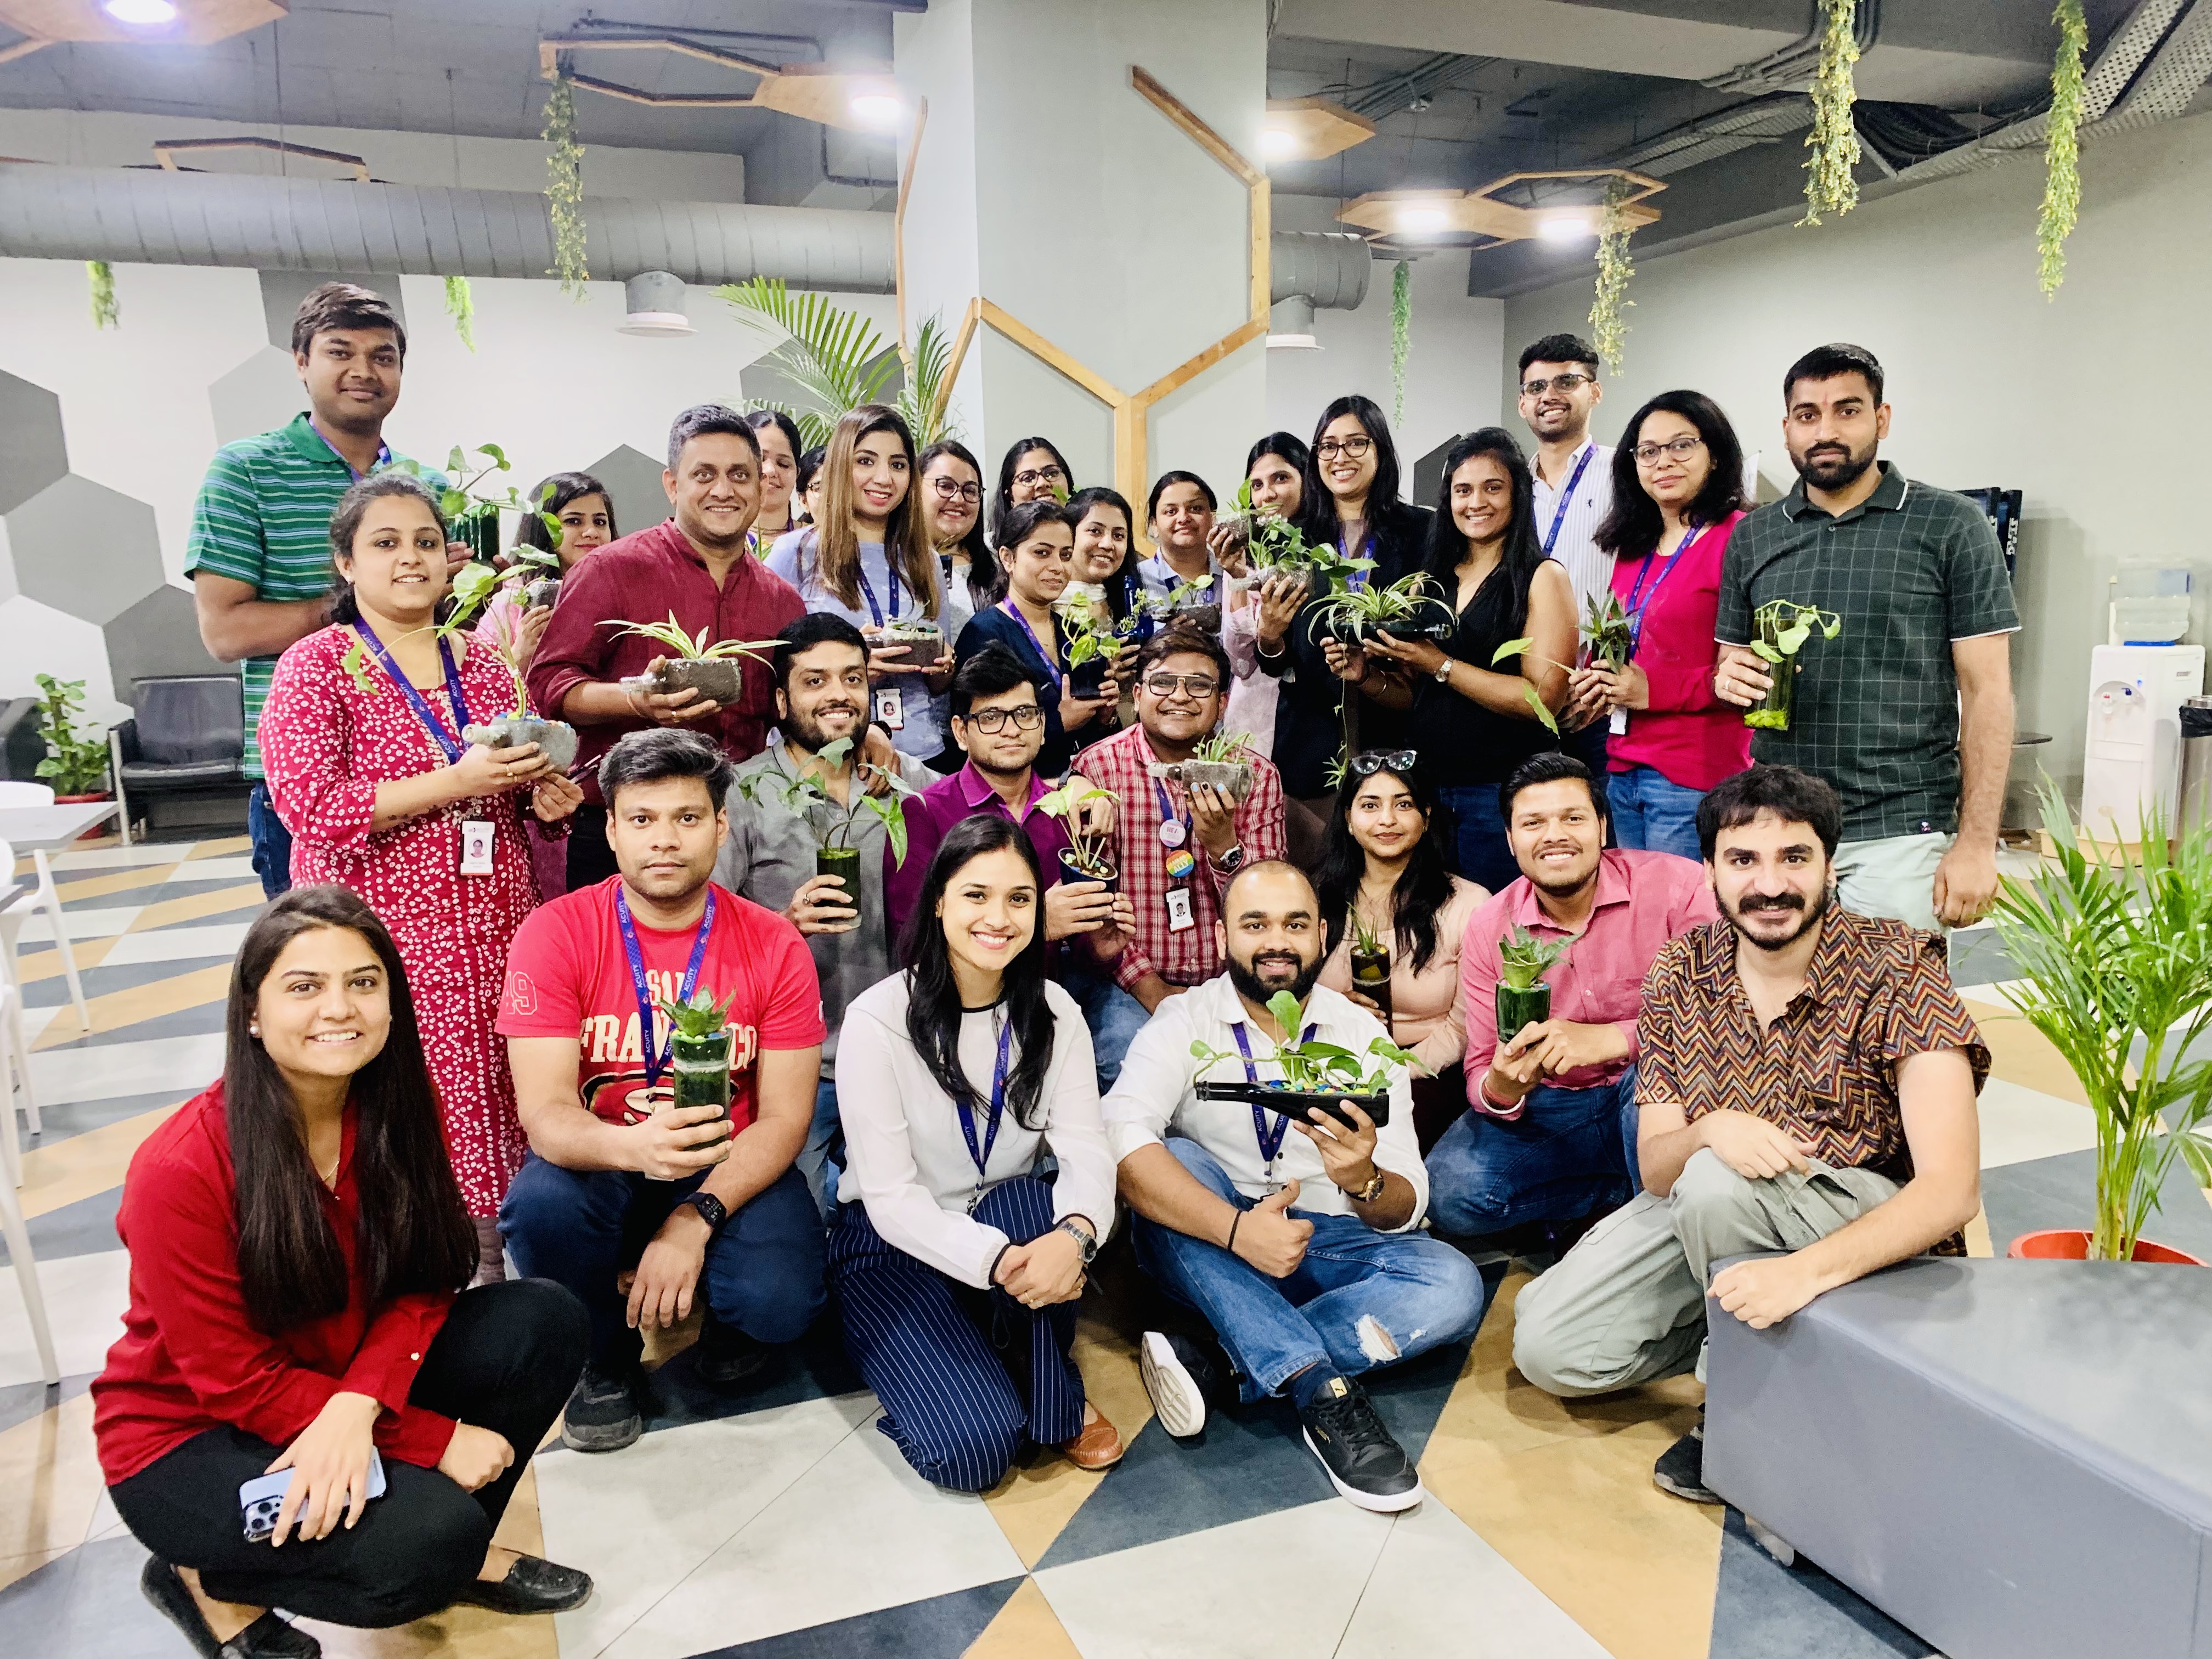 Global Recycling Day with Acuity Knowledge Partners – Workshop on Urban Gardening and Upcycling